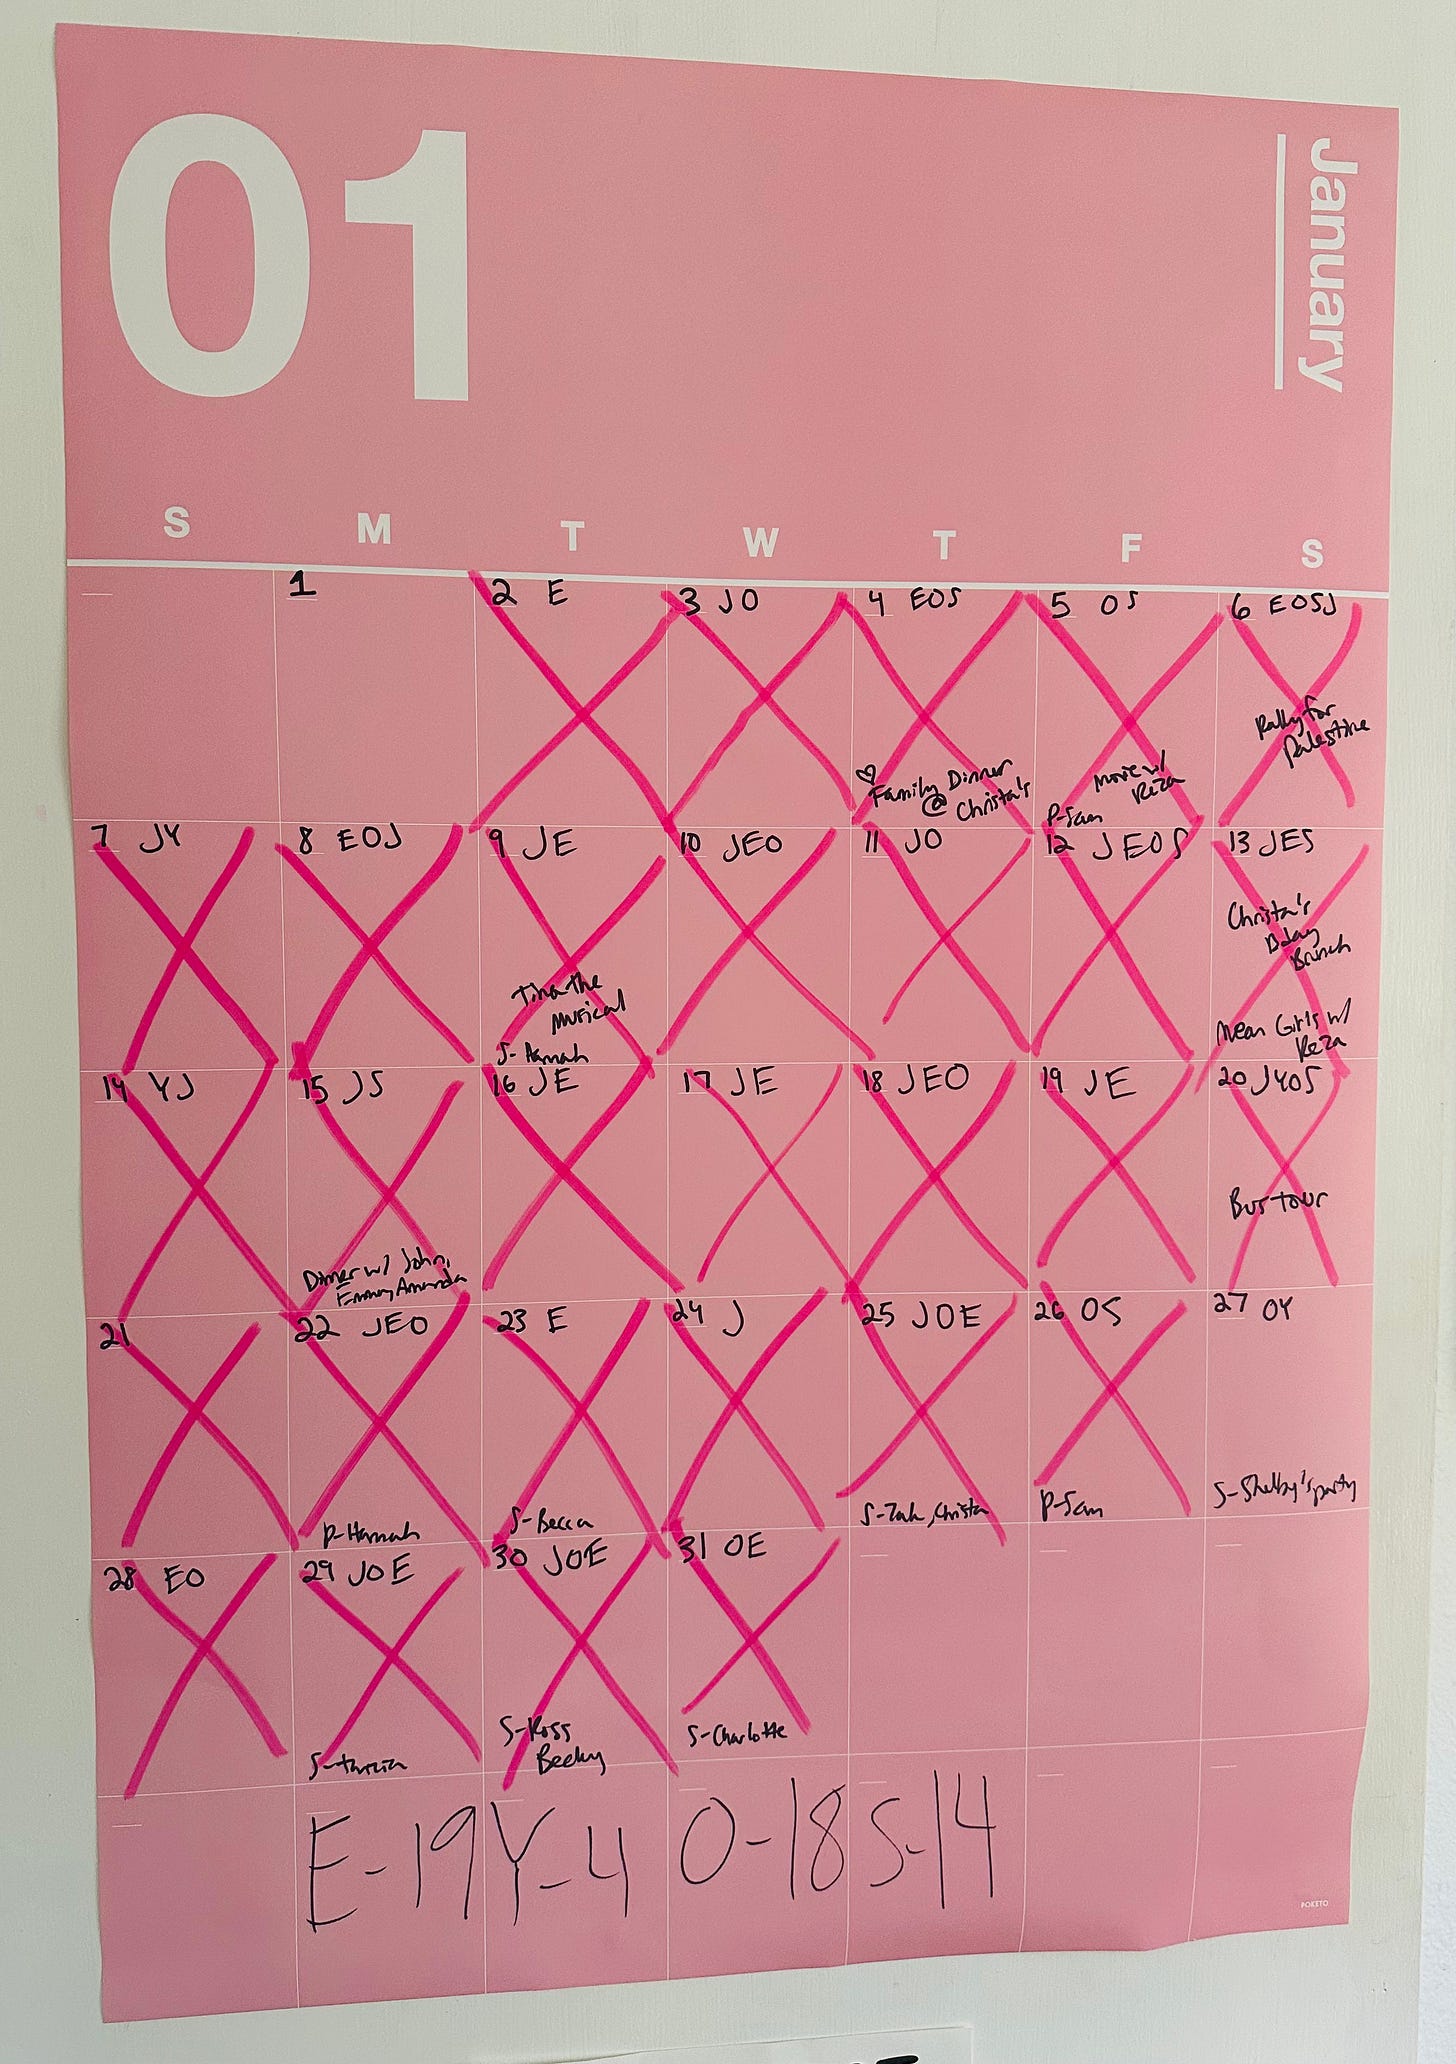 A pink January calendar is marked up with dates, events, habit-tracking, and big pink X's.